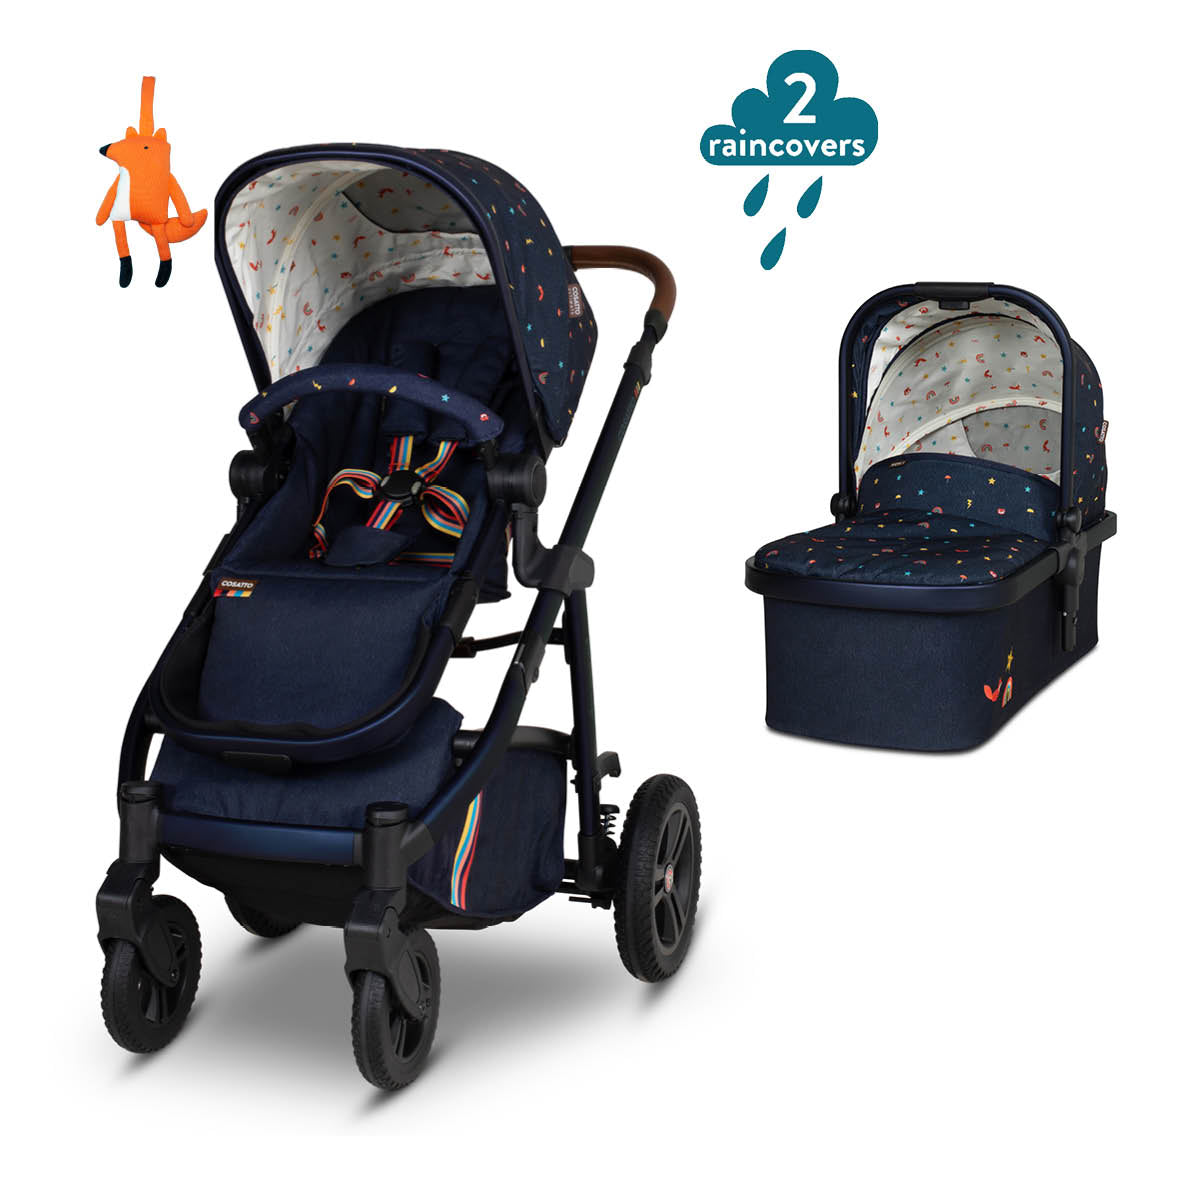 Pack Wow 3 con Carrito y Silla de Paseo - Doodle Days